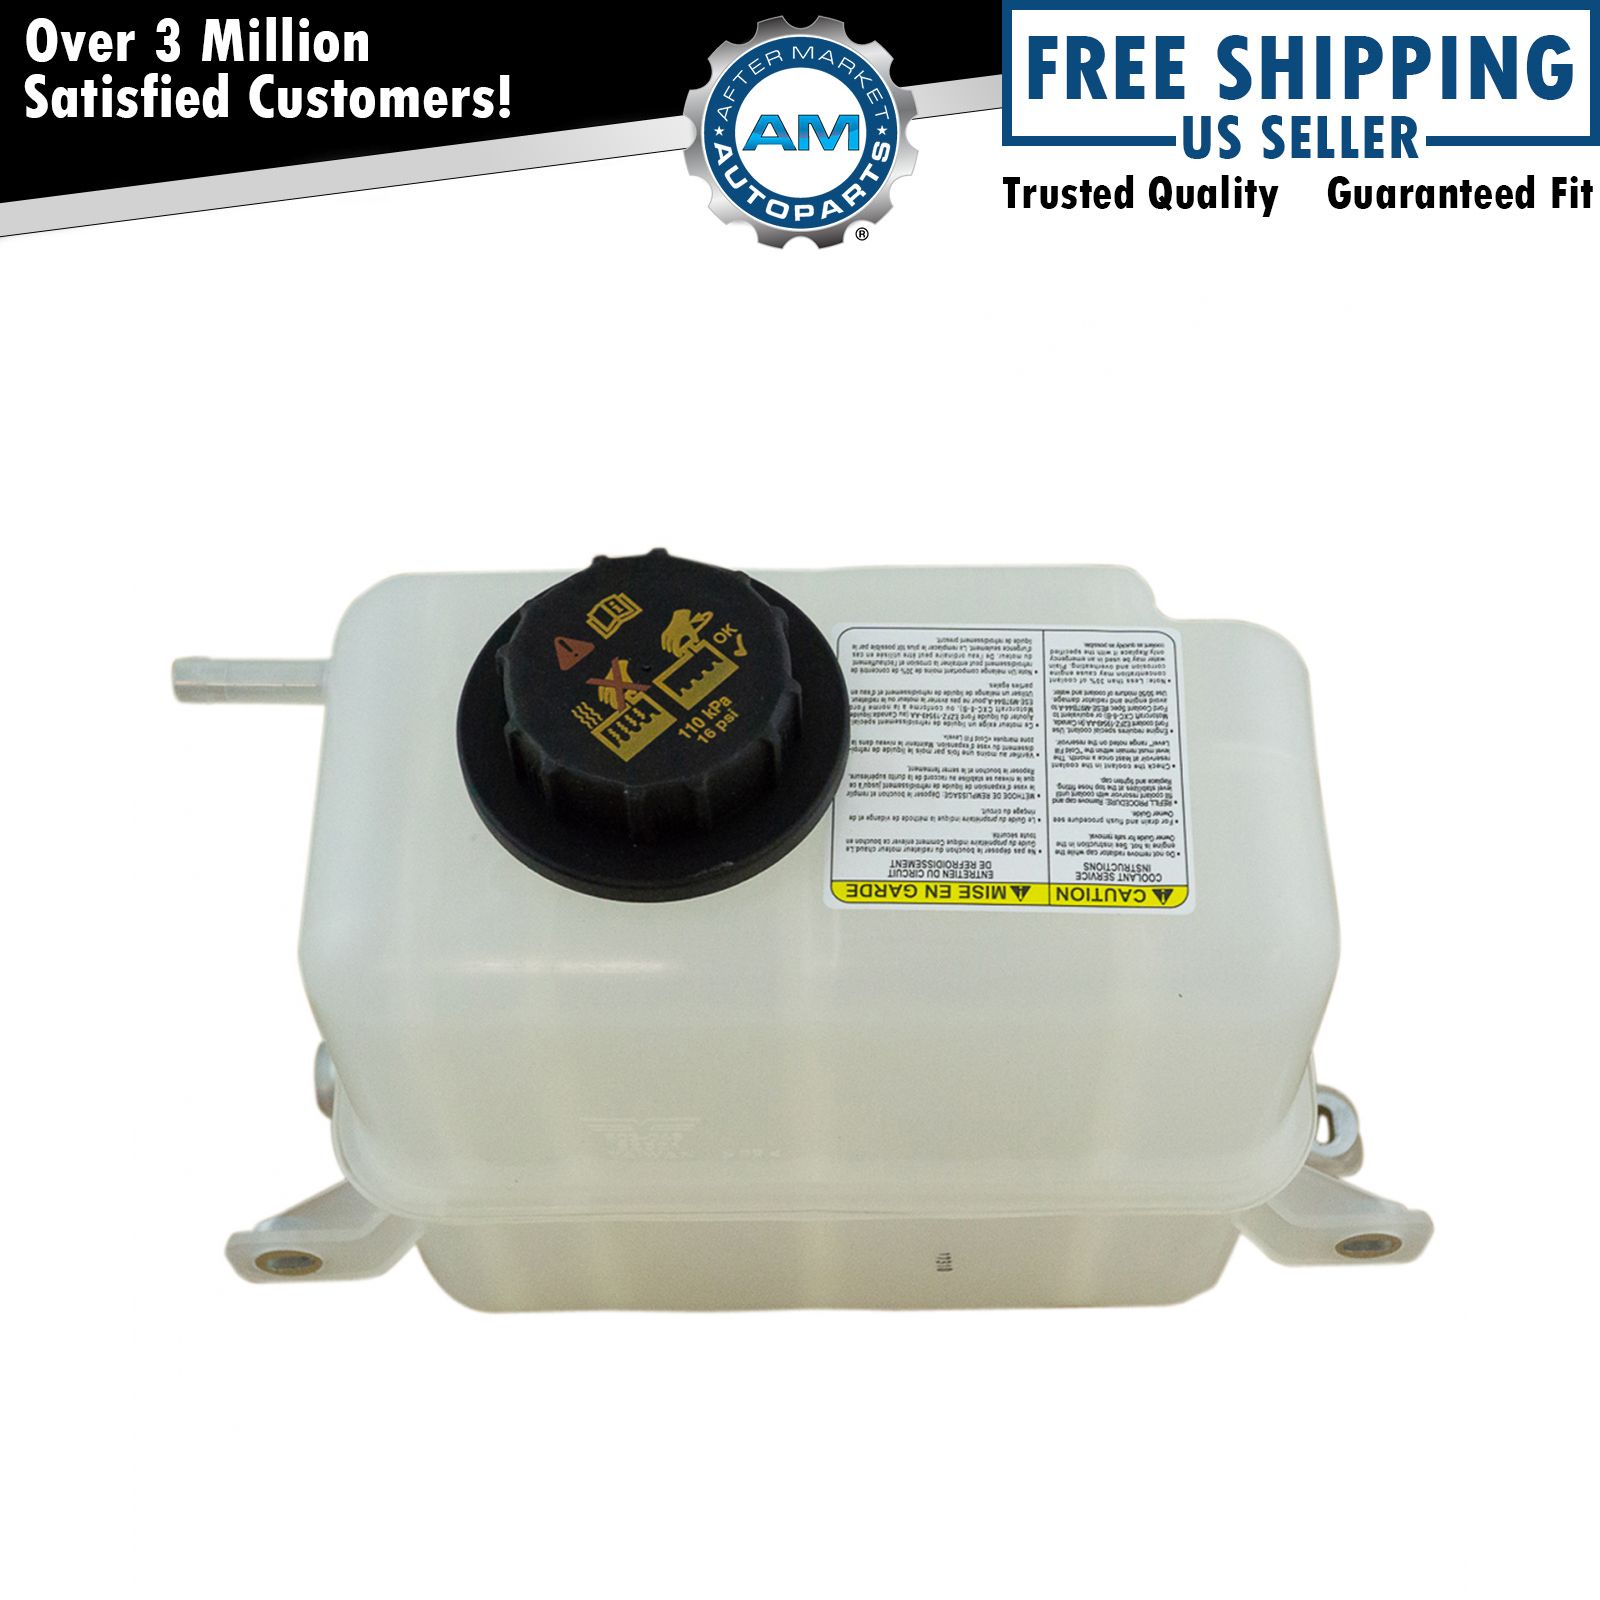 Coolant Recovery Tank Radiator Overflow Bottle for Ford F250 F350 Pickup Truck